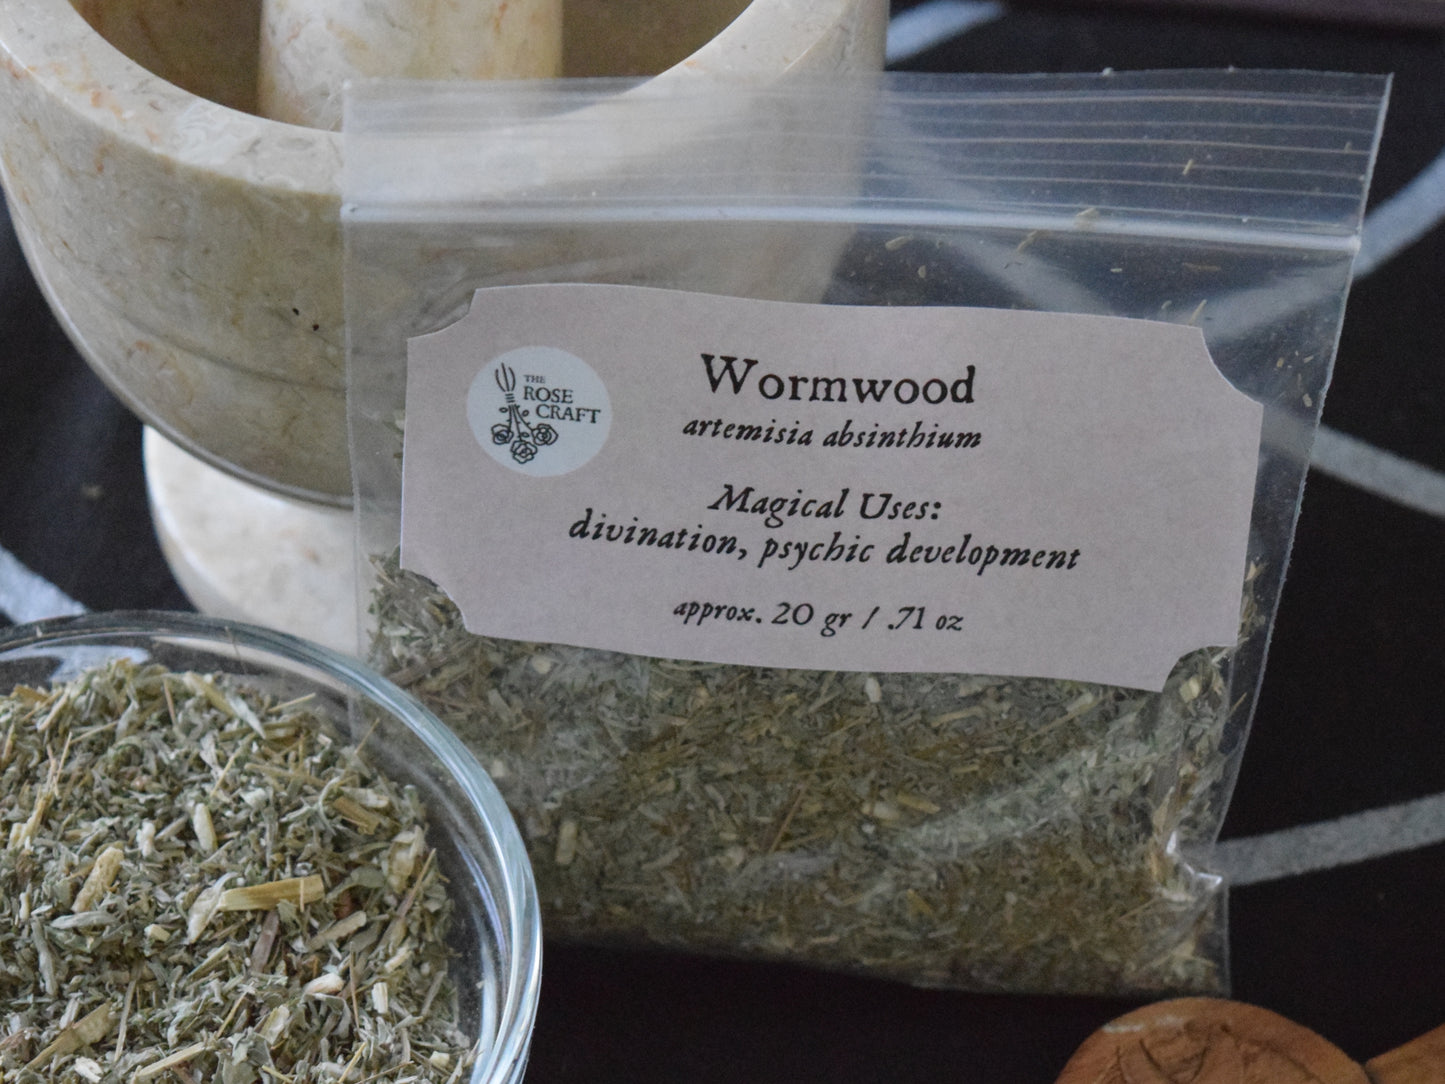 Wormwood for Divination